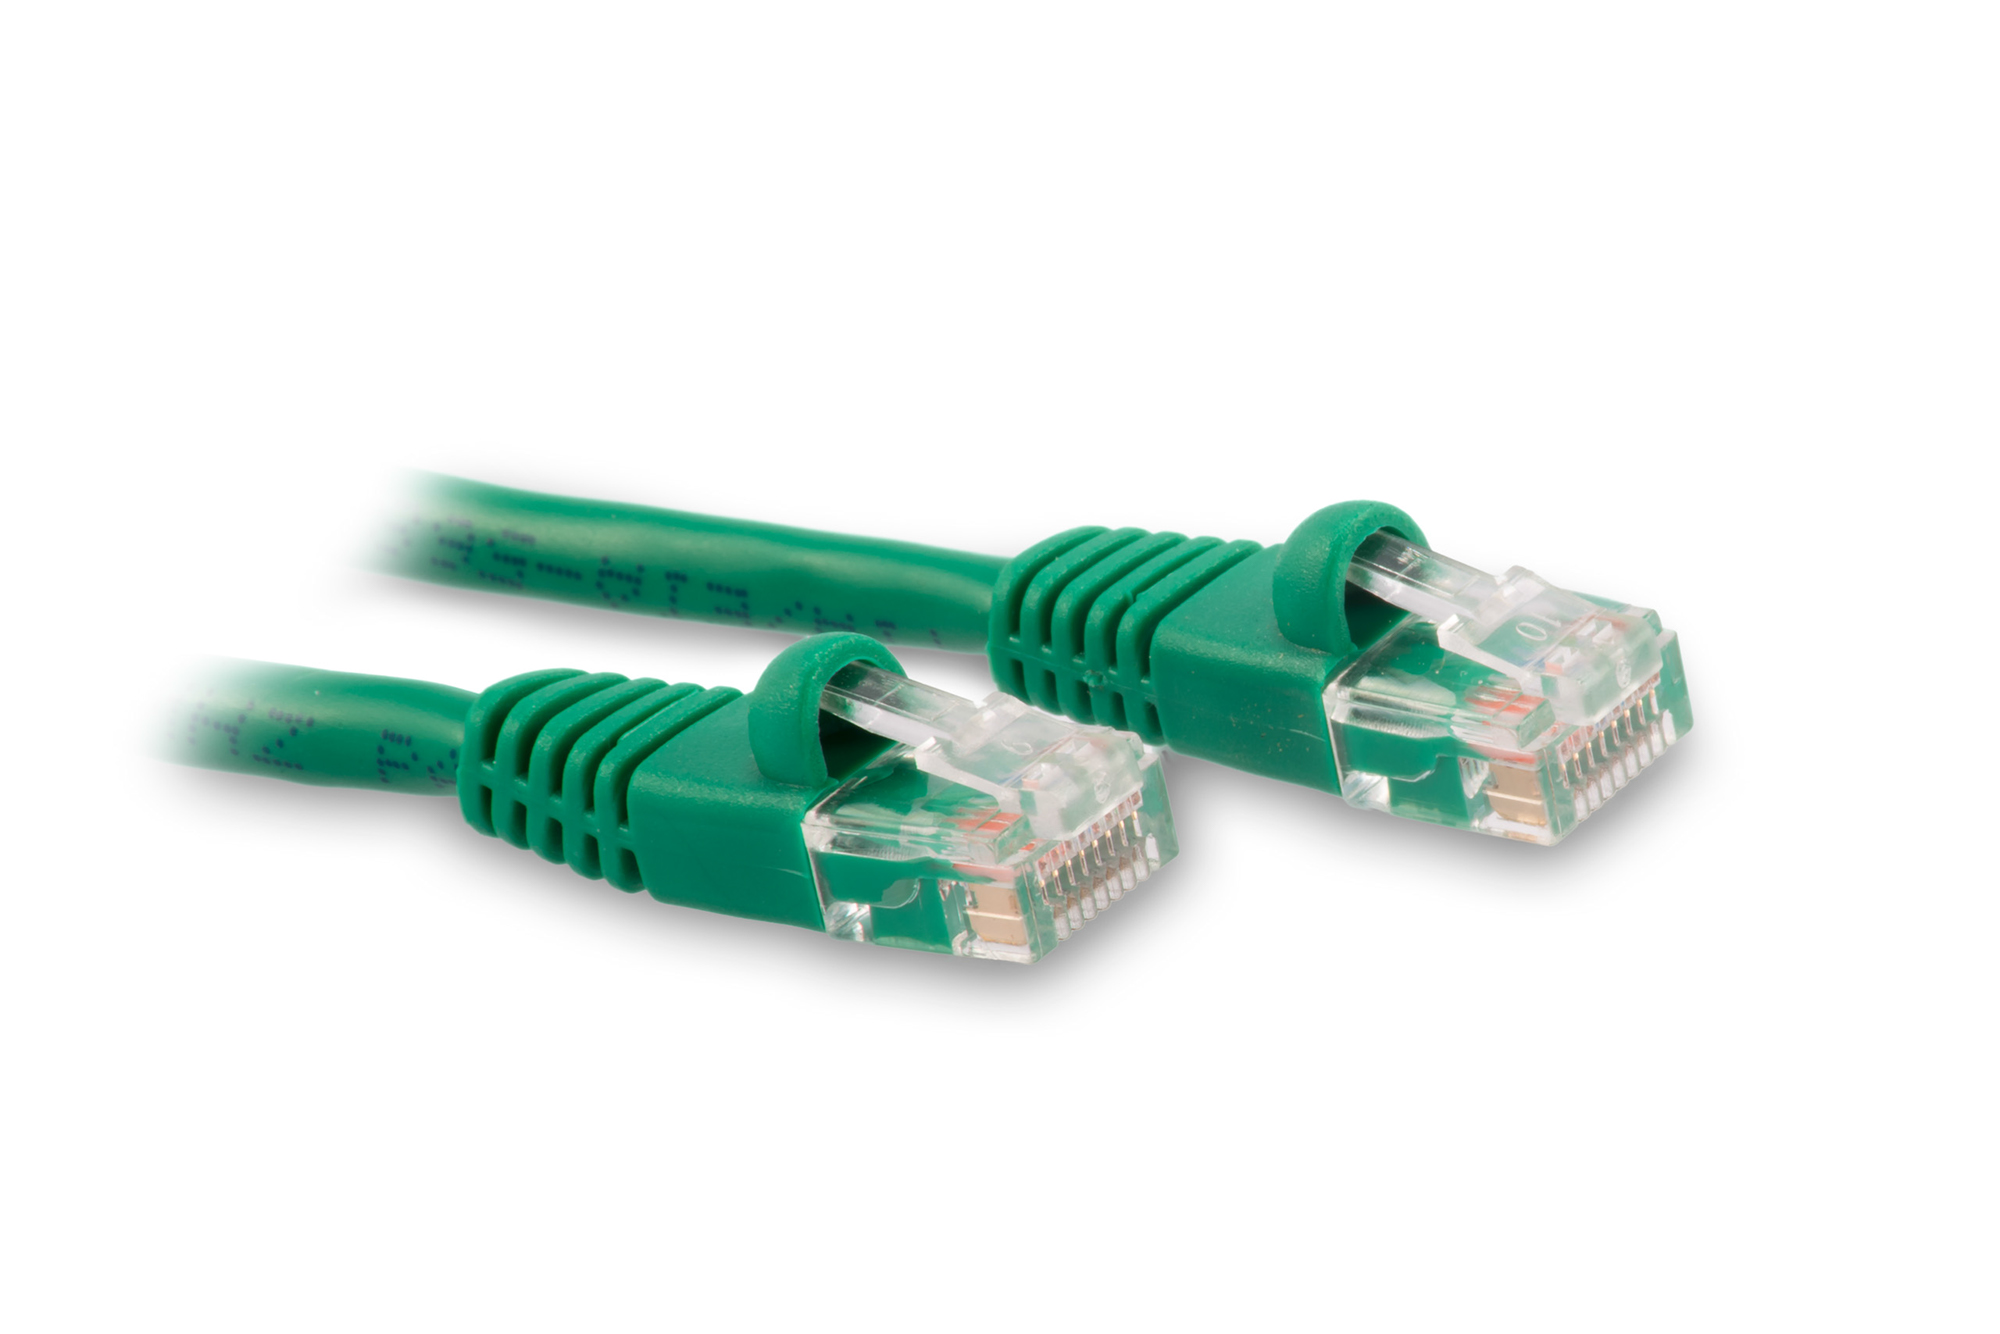 14ft Cat6 Ethernet Patch Cable - Green Color - Snagless Boot, Stranded, RJ45, 550Mhz, 24AWG